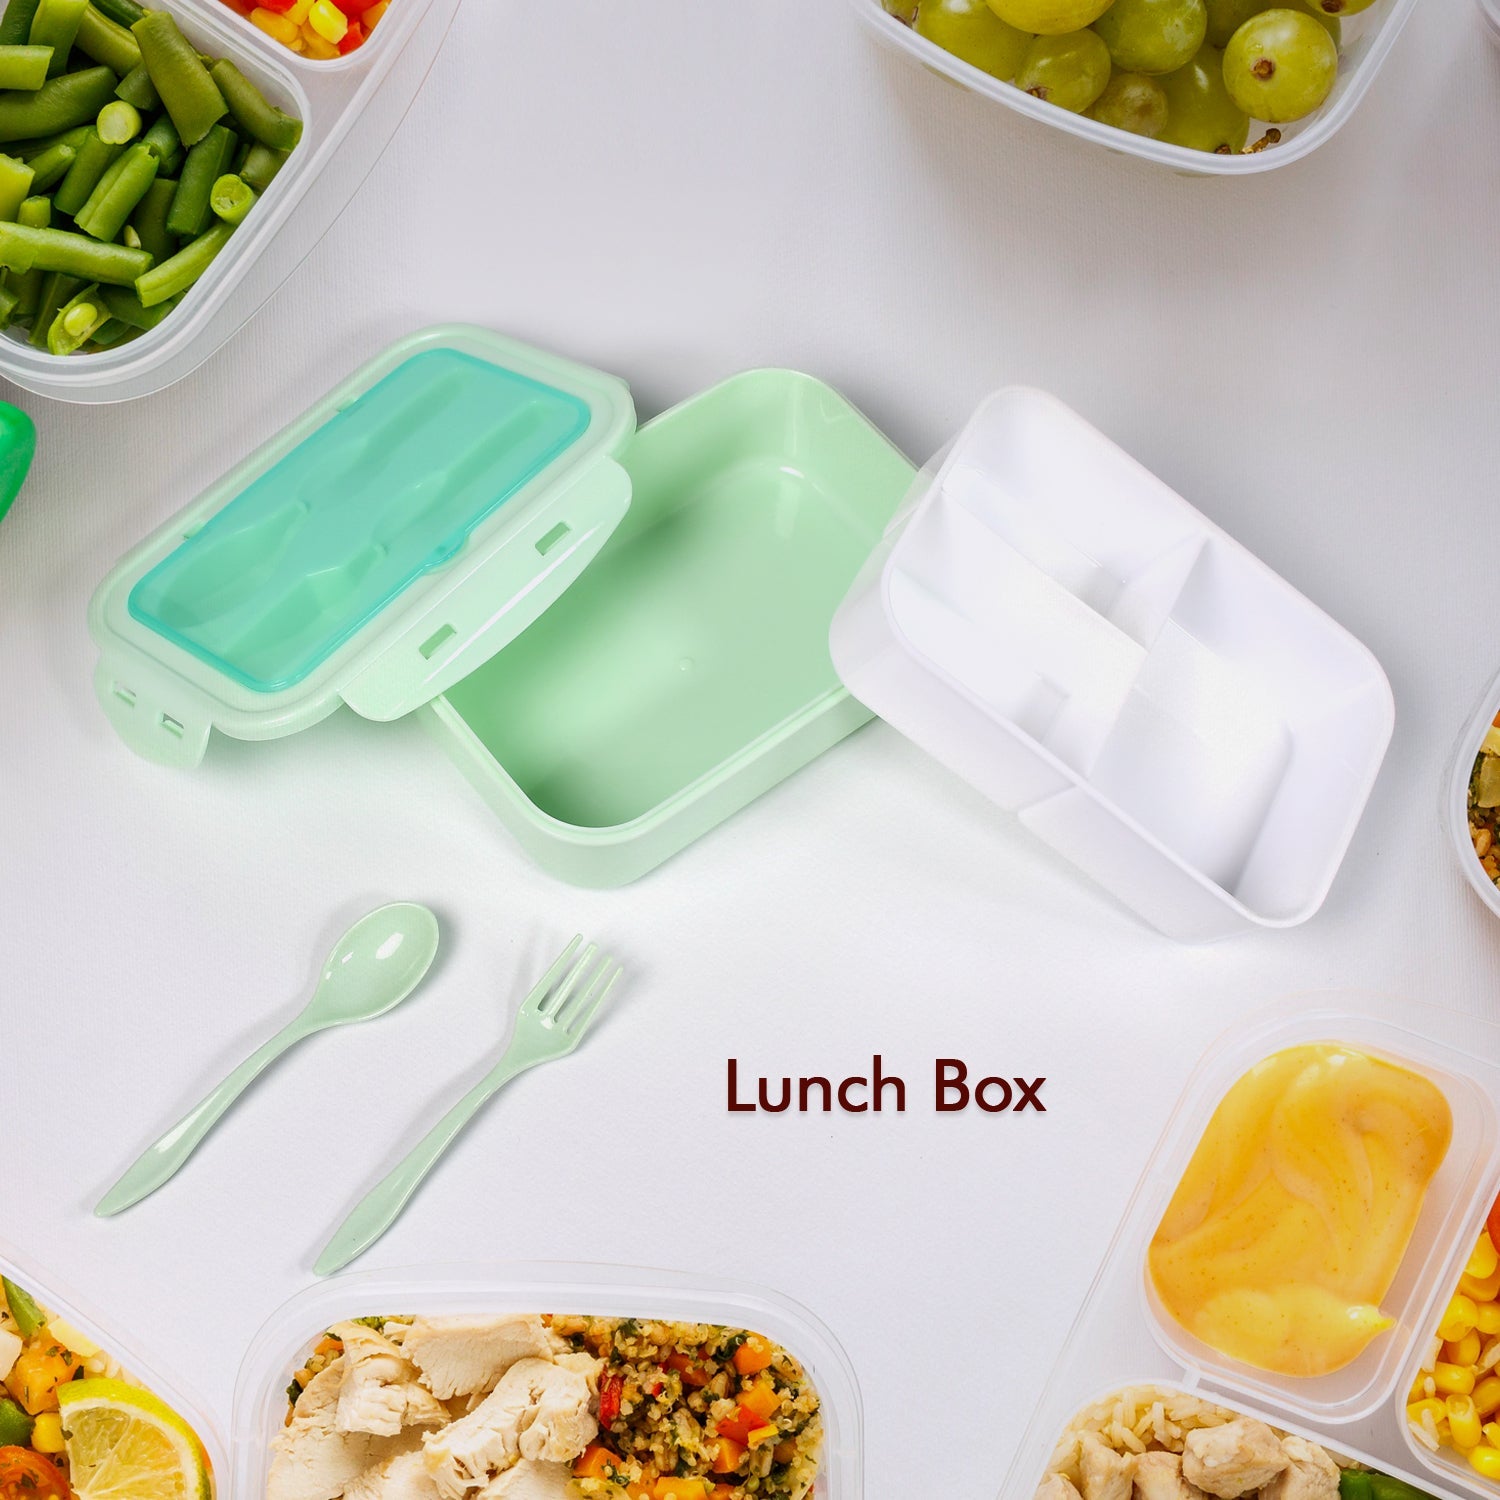 5312 Lunch Box for adults and students With Utensils, Insulated Lunch Bag Suitable for dining out 3-grid leak proof lunch box 